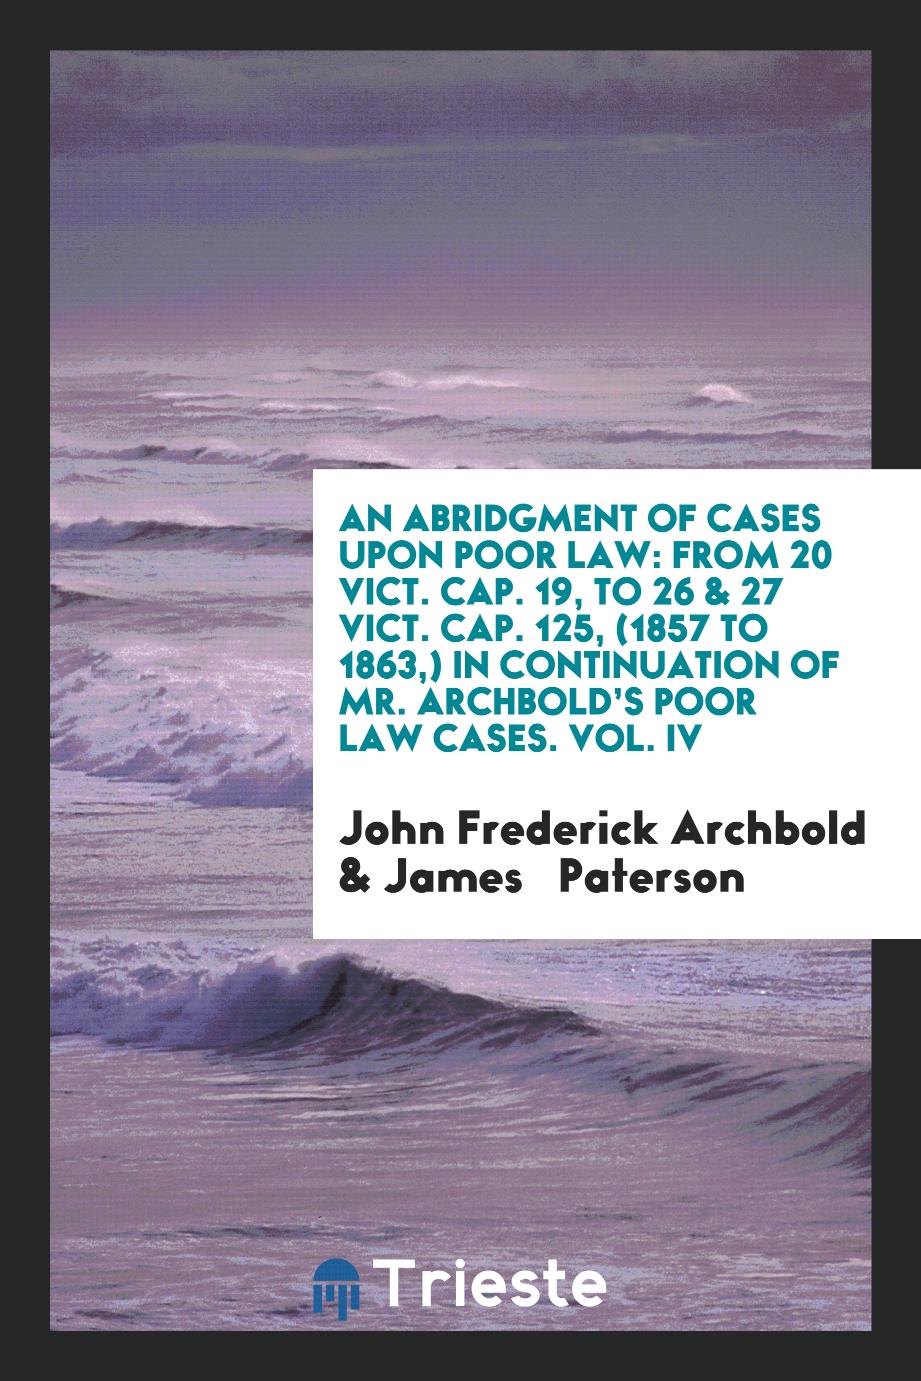 An Abridgment of Cases Upon Poor Law: From 20 Vict. Cap. 19, to 26 & 27 Vict. Cap. 125, (1857 to 1863,) In Continuation of Mr. Archbold’s Poor Law Cases. Vol. IV